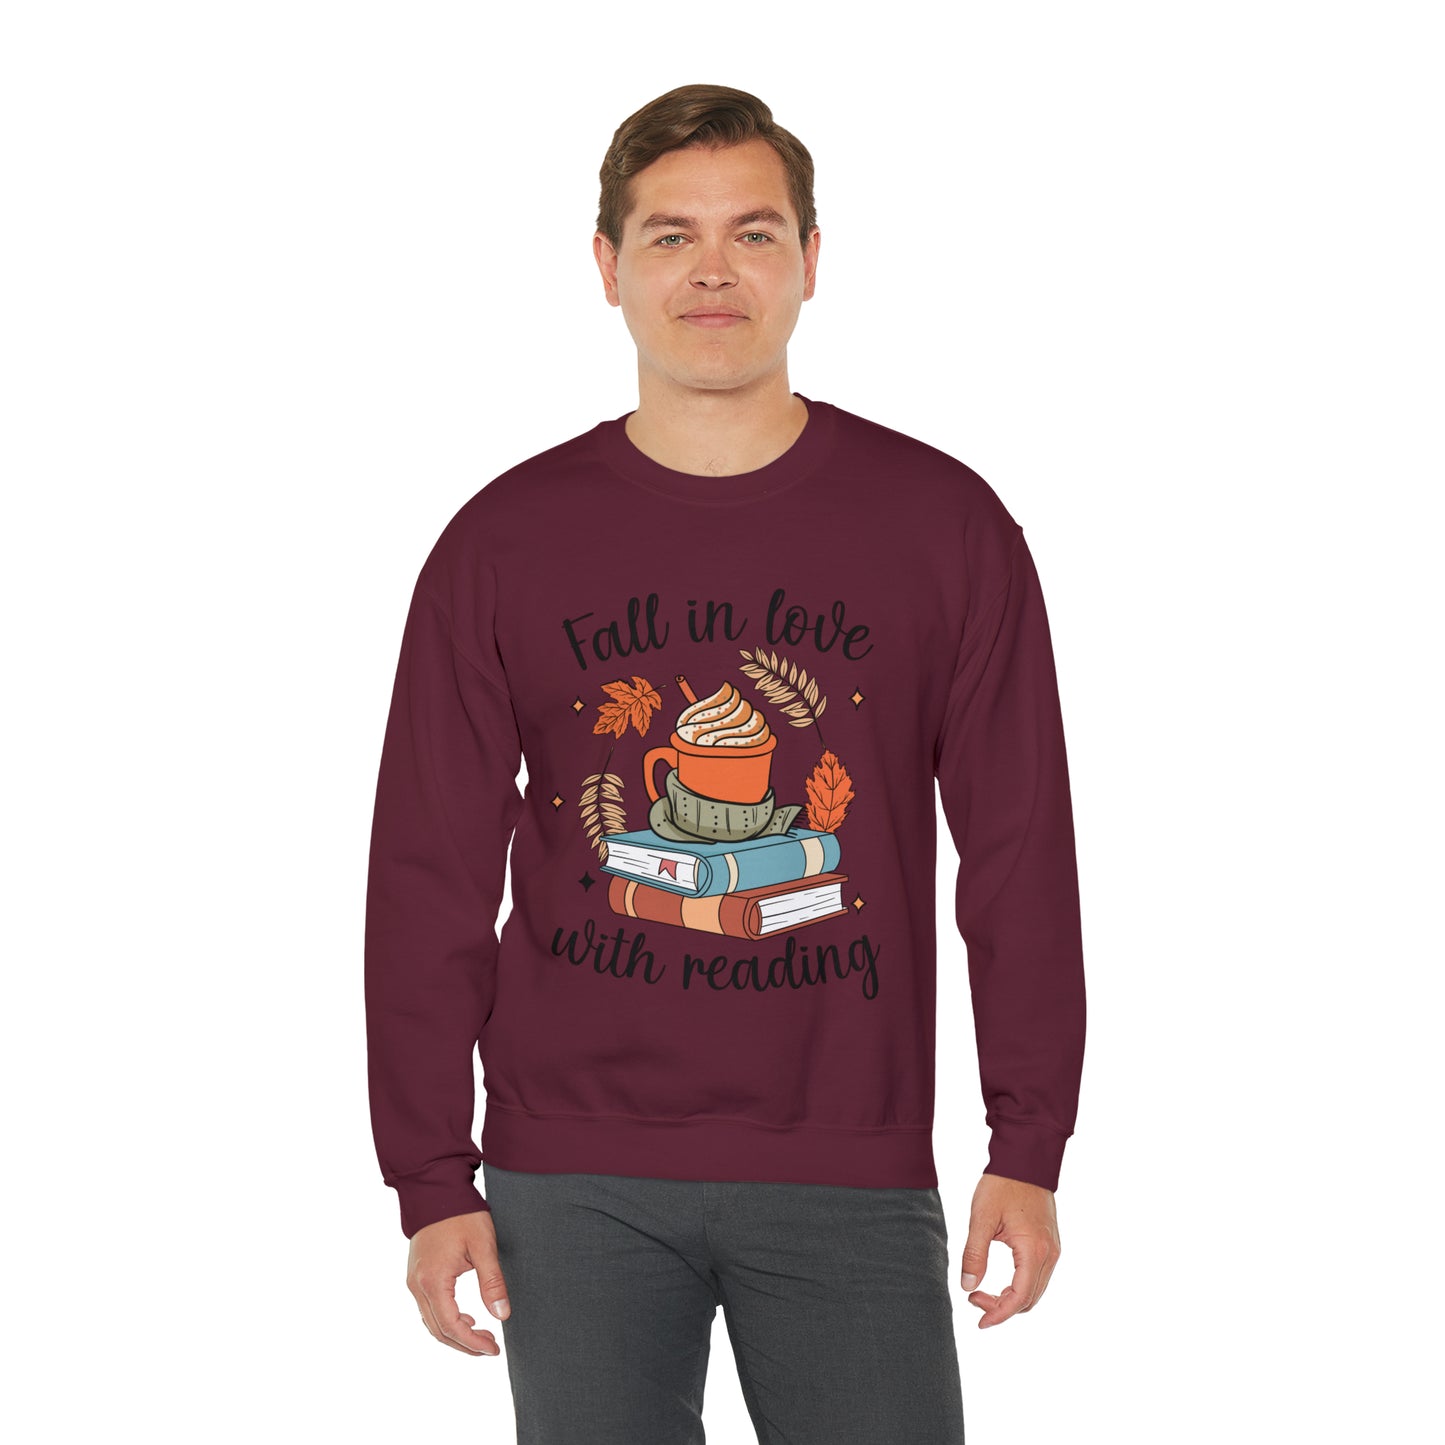 Fall in Love with Reading - Unisex Heavy Blend™ Crewneck Sweatshirt